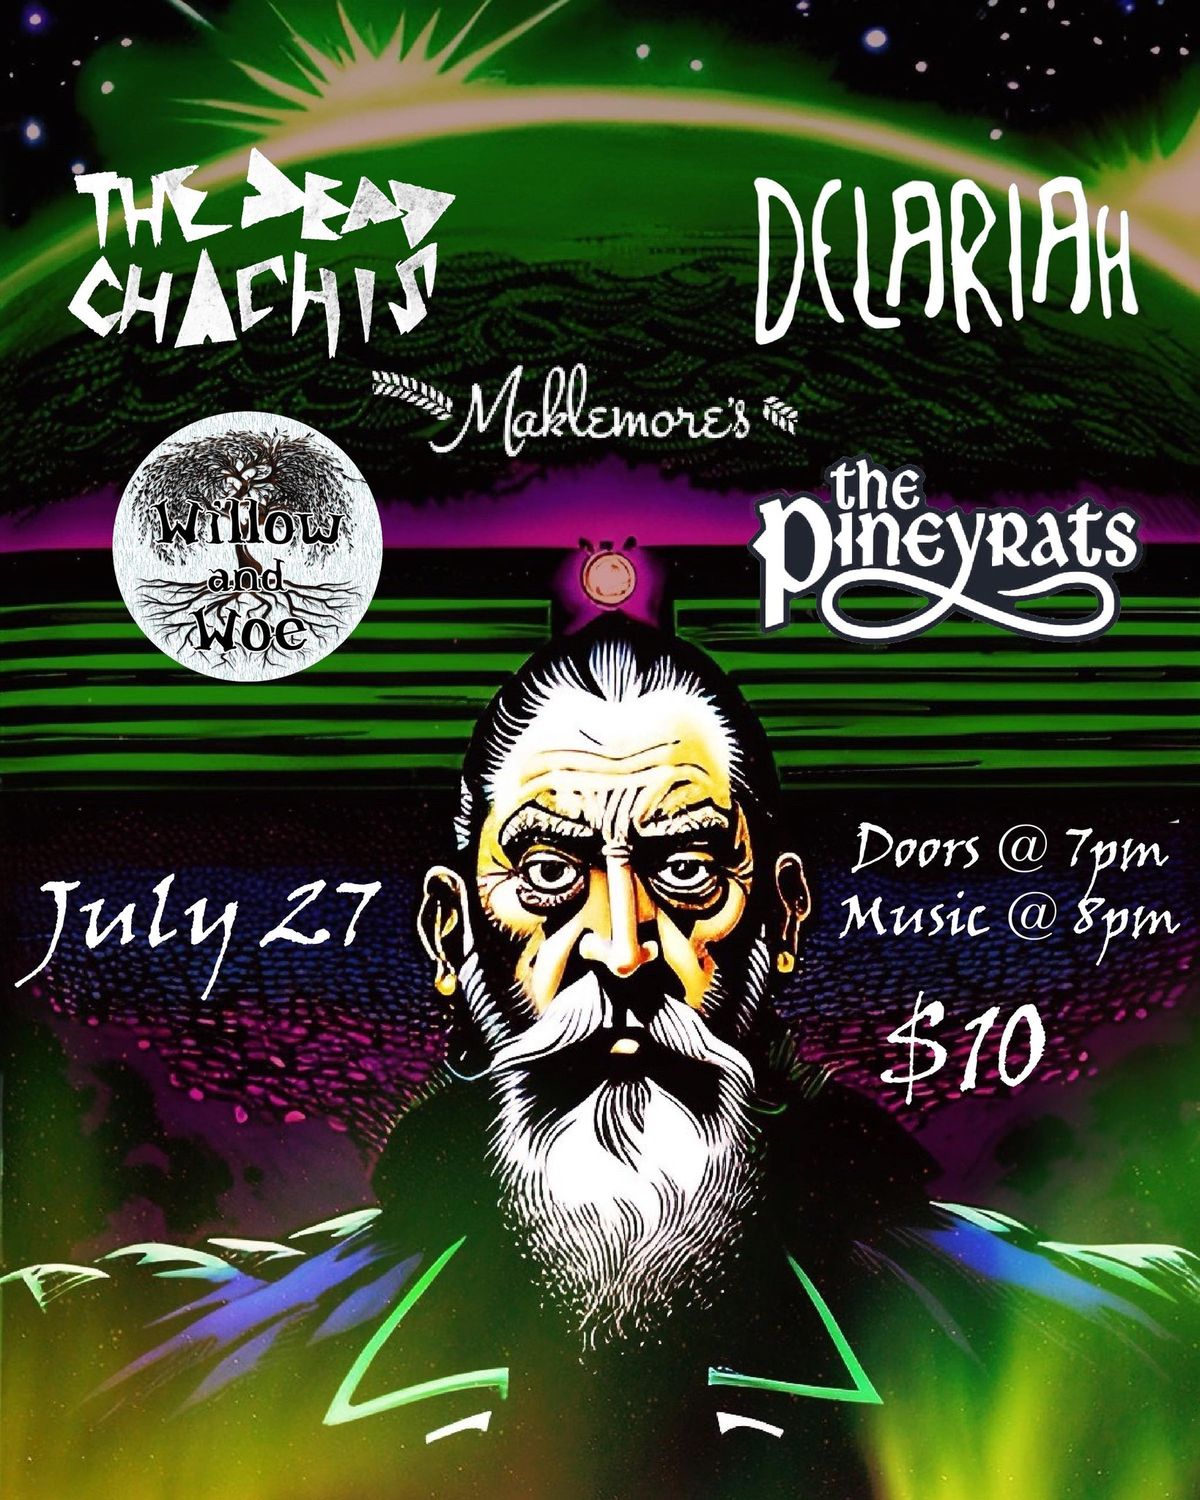 Delariah, The Dead Chachis, The Pineyrats, & Willow and Woe @ Maklemore's